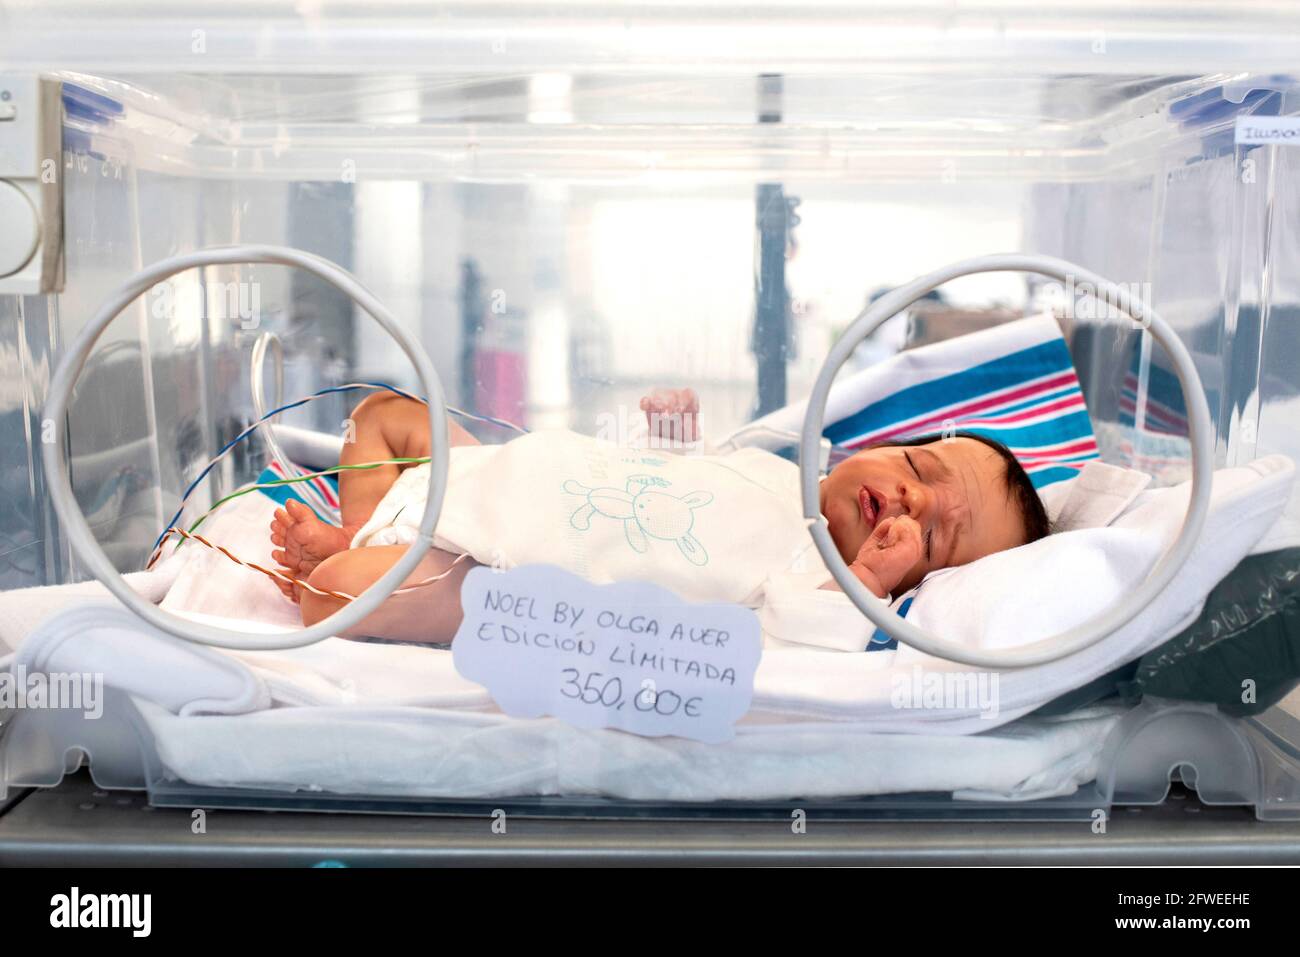 SPAIN, VALENCIA 2019-04-28. A reborn baby in his incubator if the realism of reborn babies is pushed to the extreme, the staging also allows to seduce Stock Photo